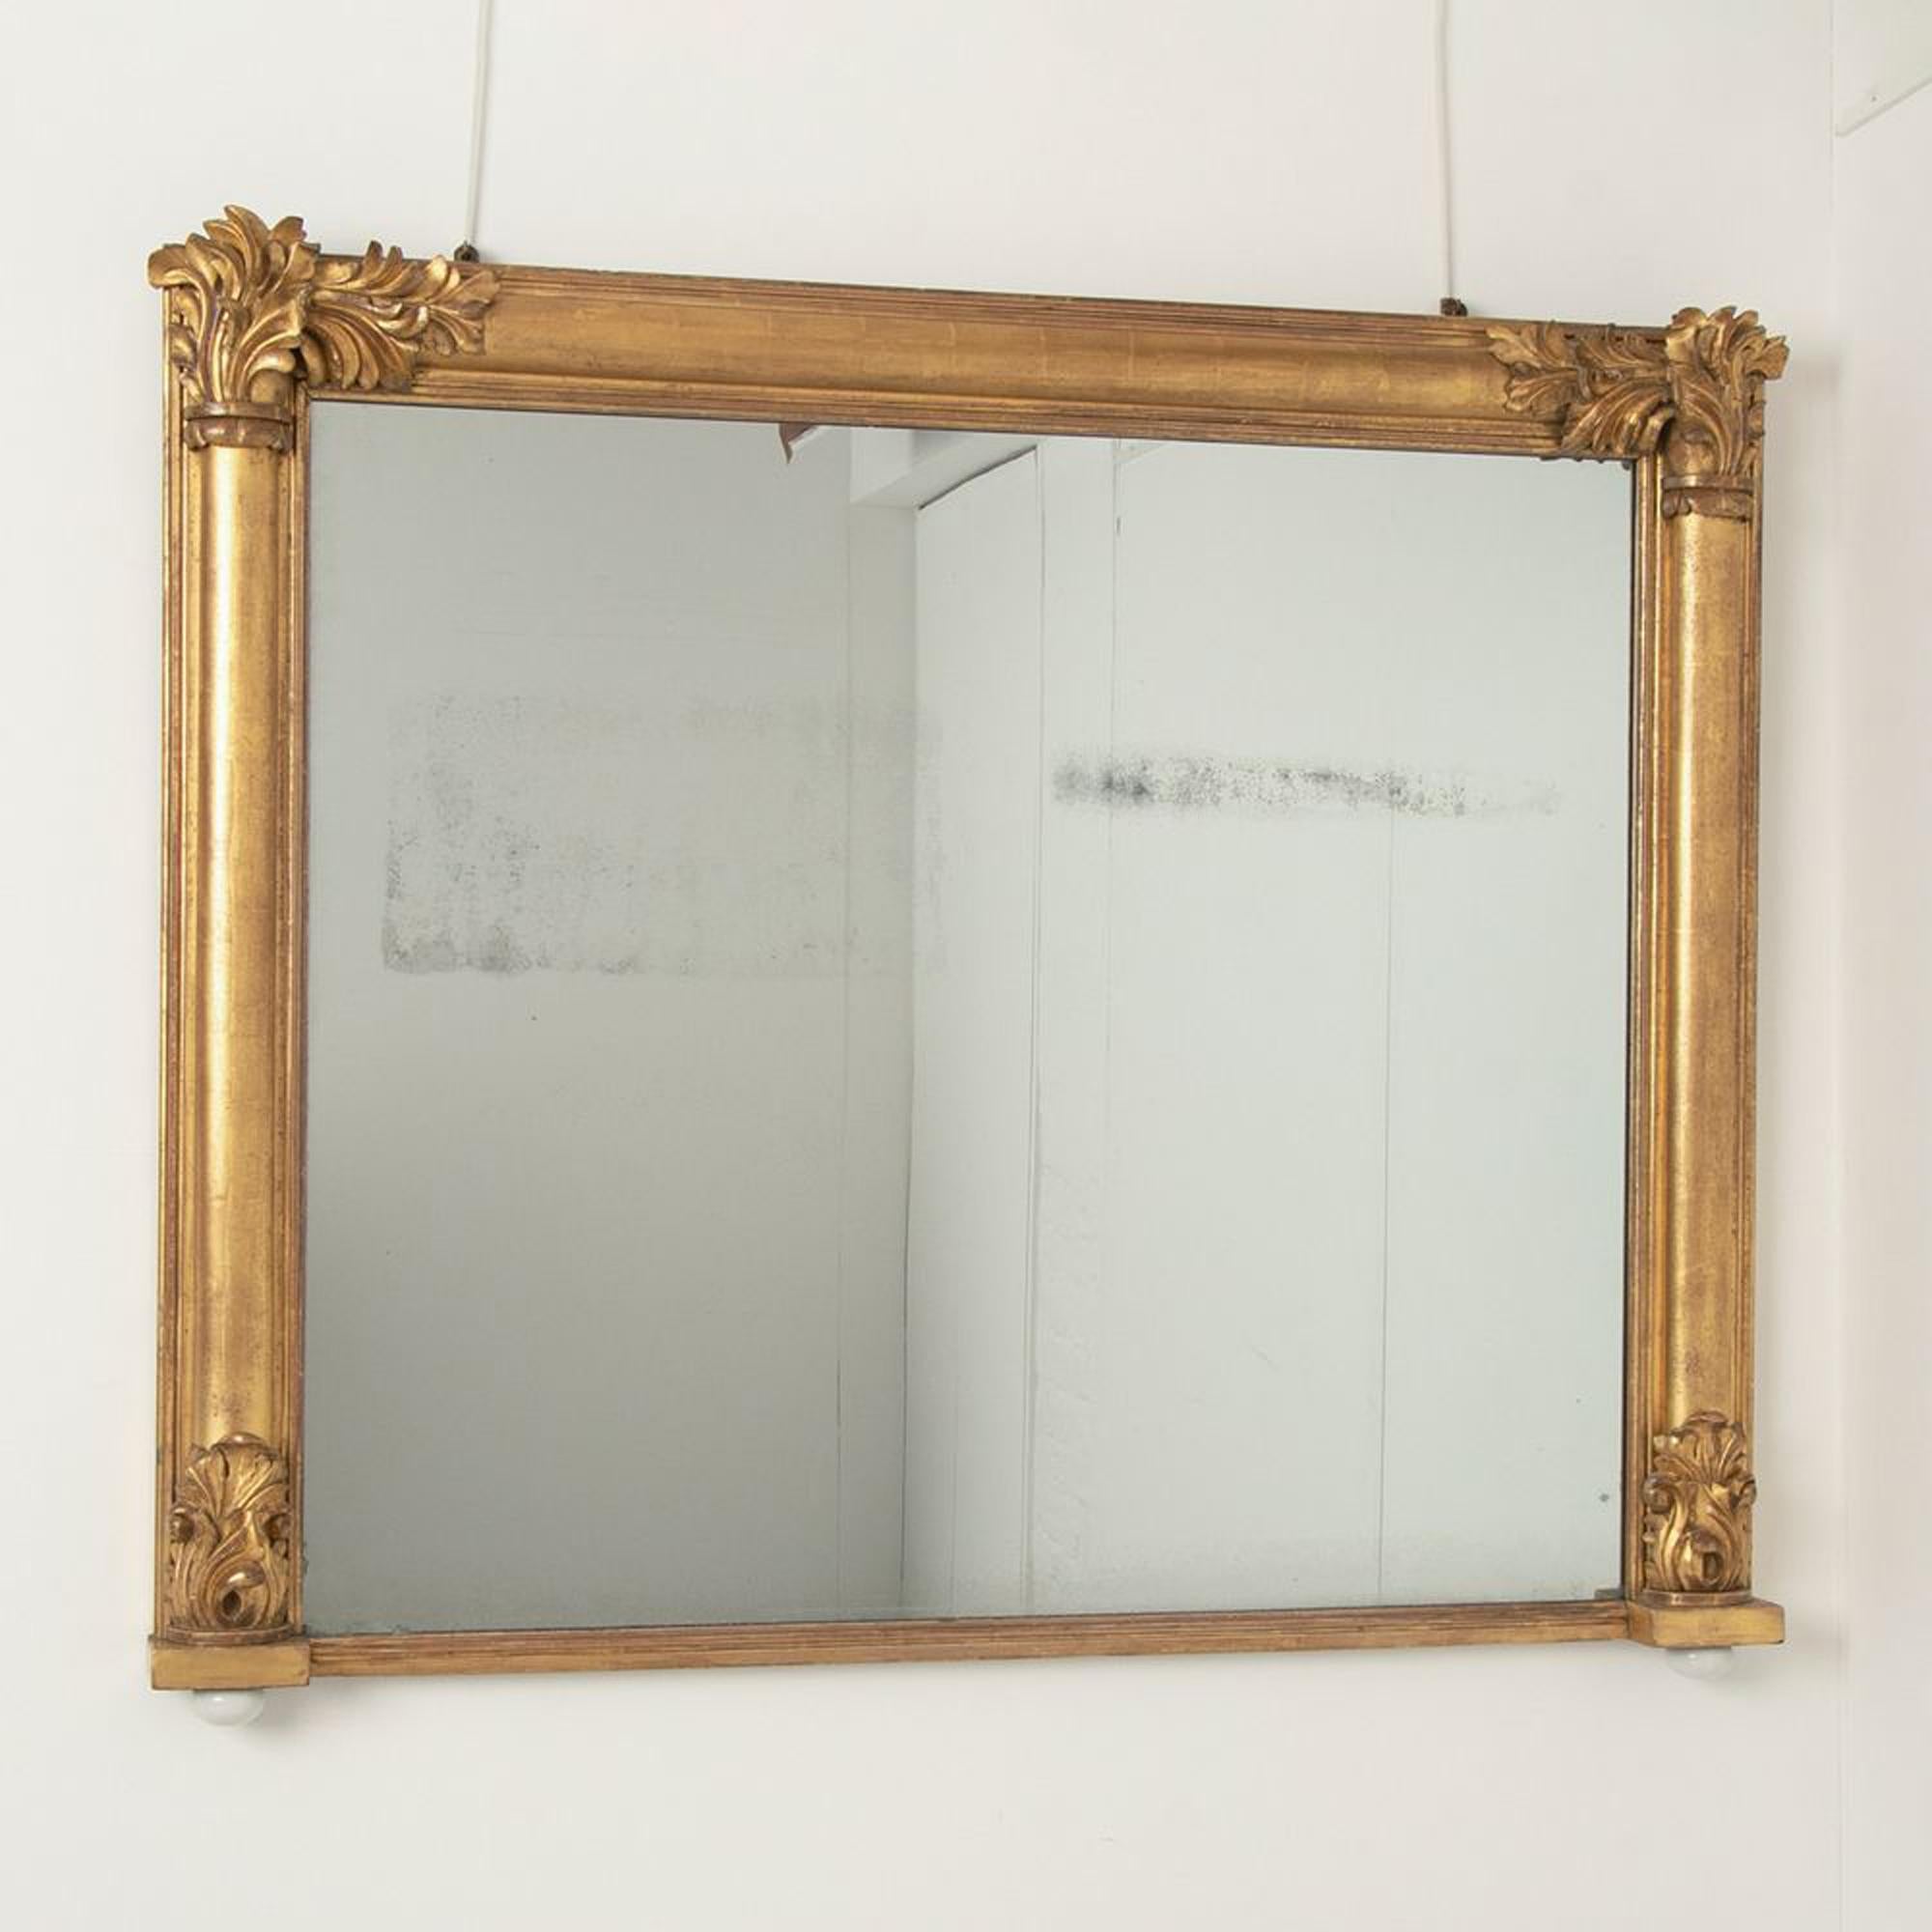 An antique gilt overmantle mirror by Willian Cribs, rectangle in shape with carved leaf details on each corner. The mirror retains its original mercury silvered mirror plate and original water gilding. There is foxing to the glass.